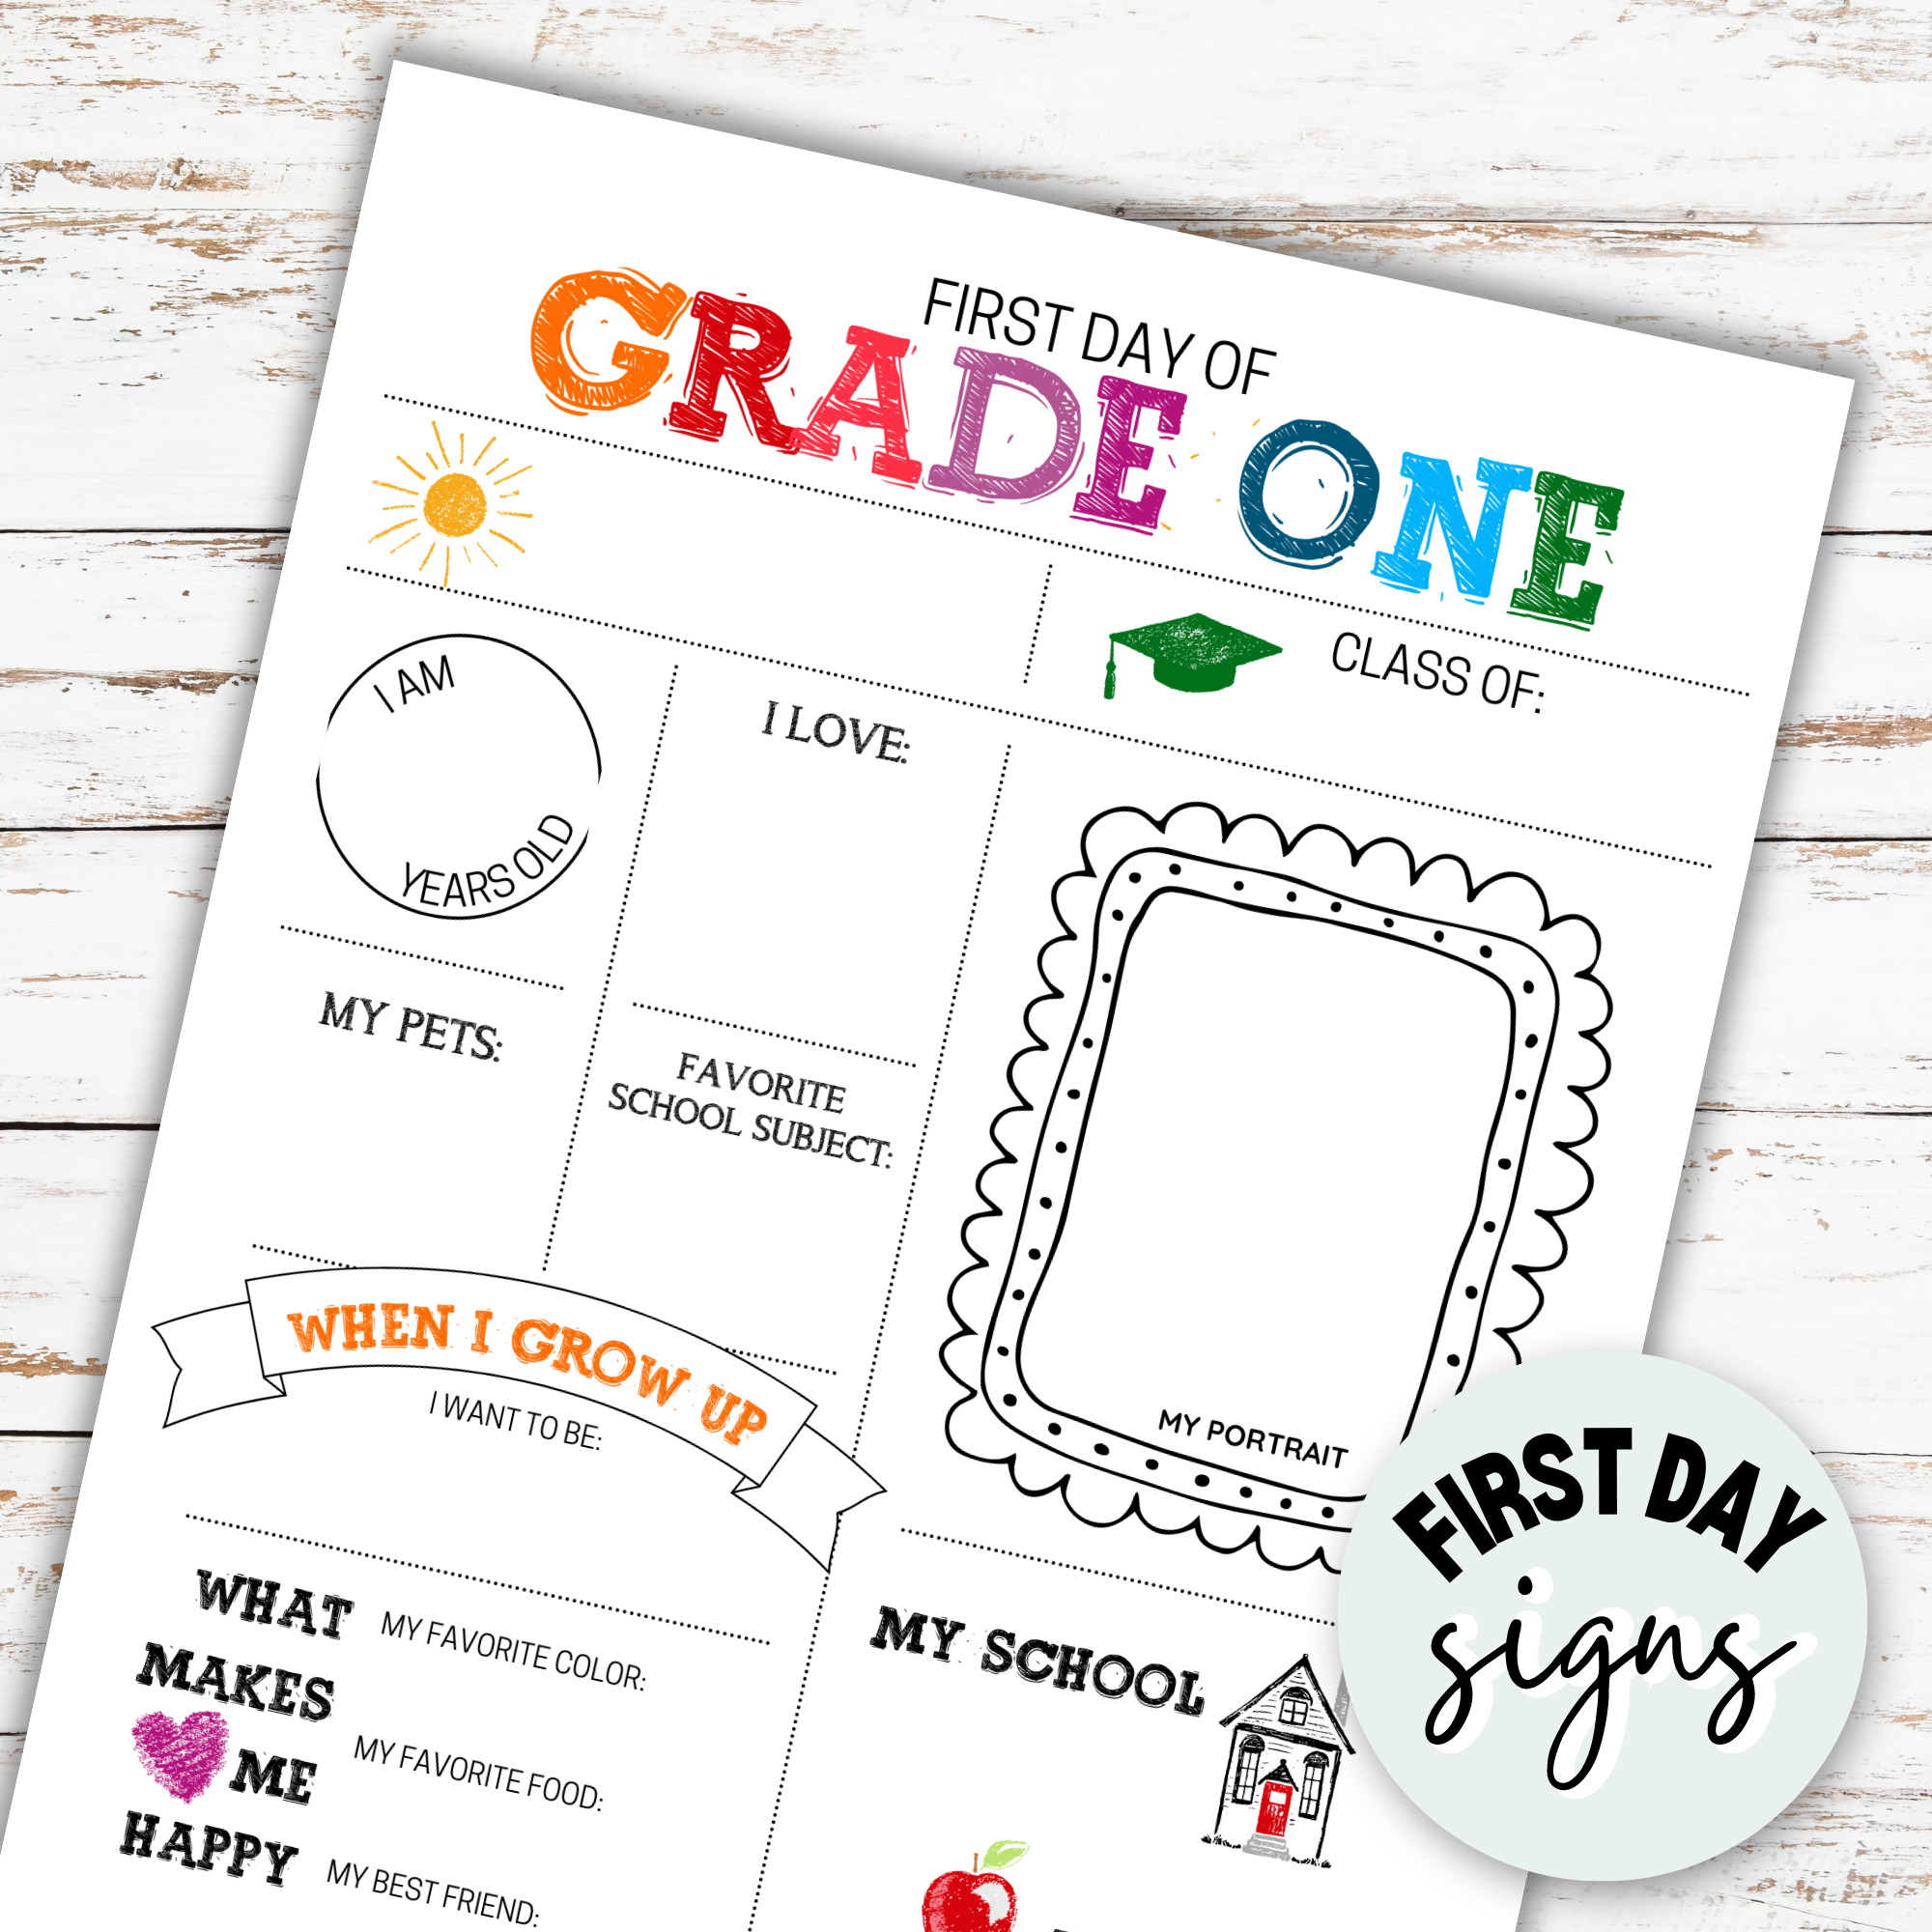 First Day of School Sign (Classic Clean Version) - Kindergarten to Grade Six